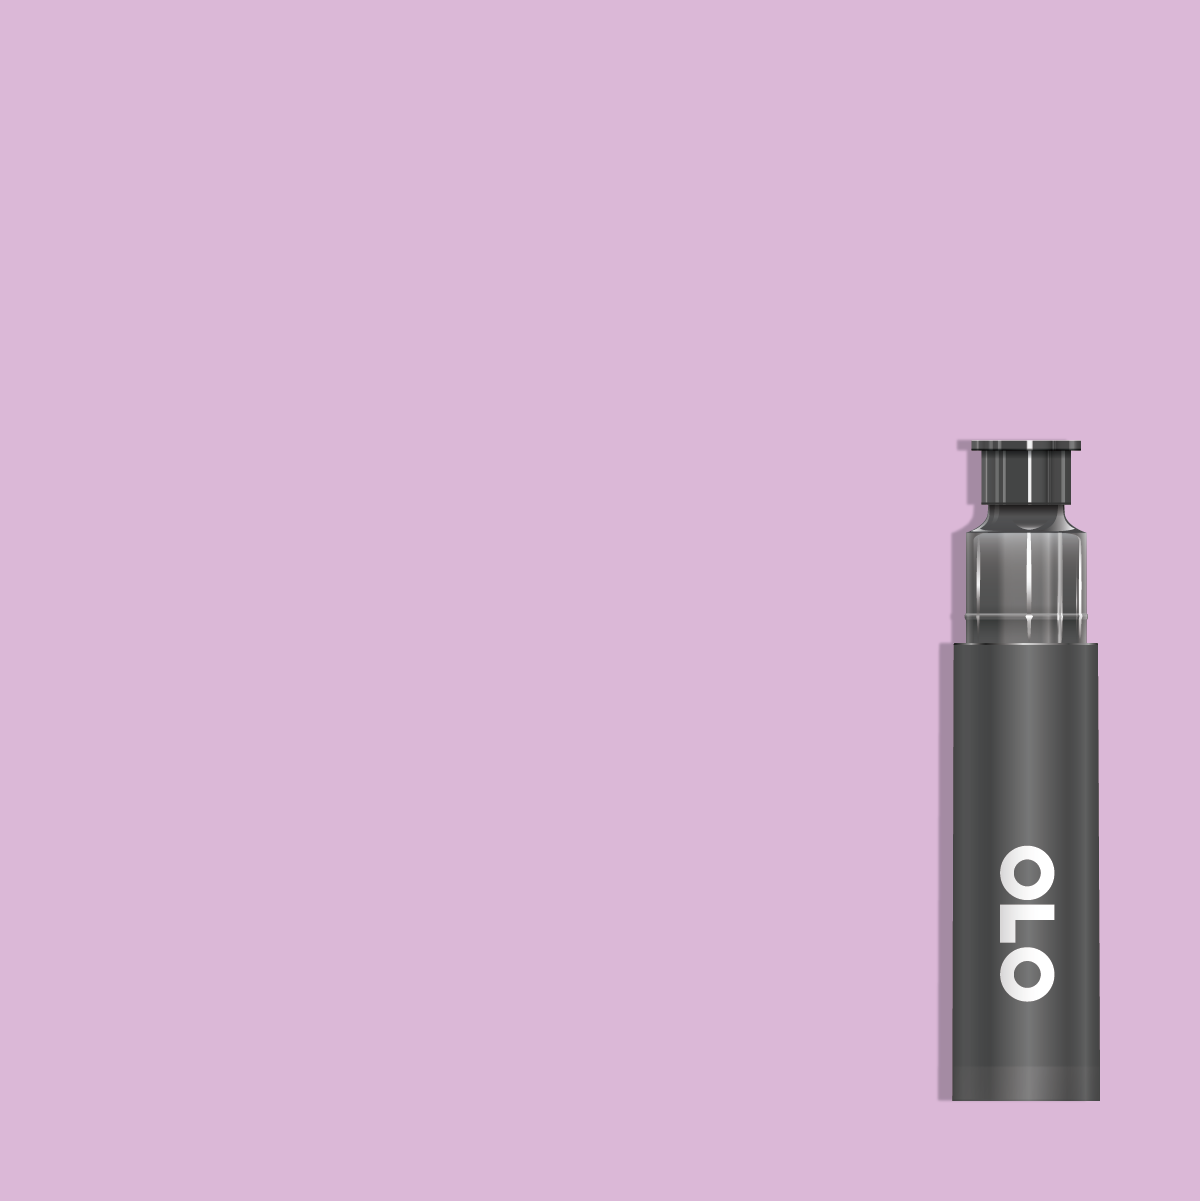 OLO V1.1 Heather Replacement Cartridge